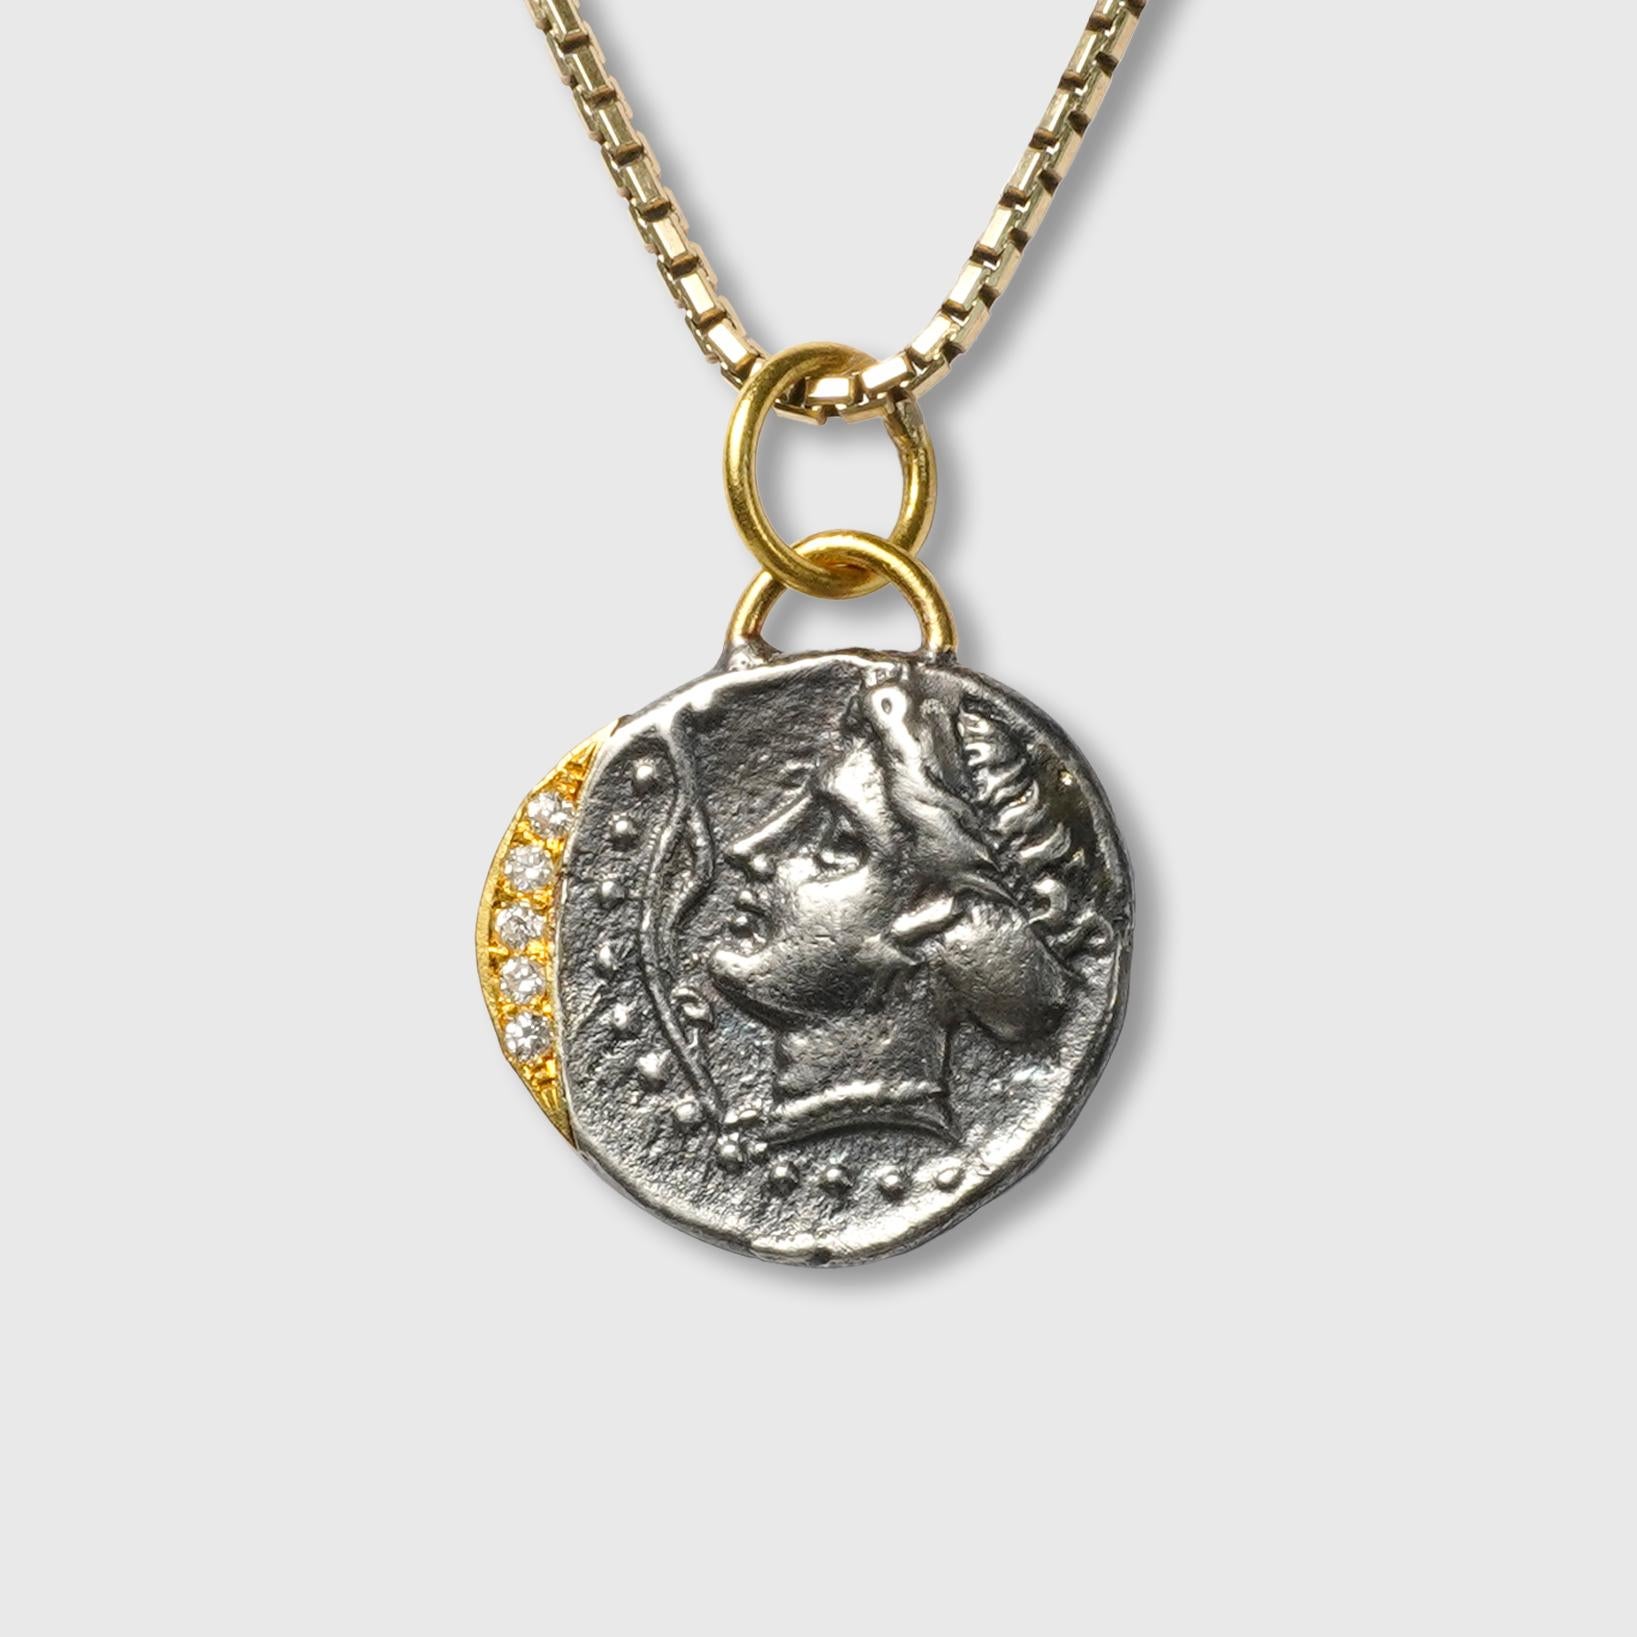 Round Cut Ancient Sinope Water Nymph Coin Replica Charm Pendant, 24K Gold Silver Diamonds For Sale